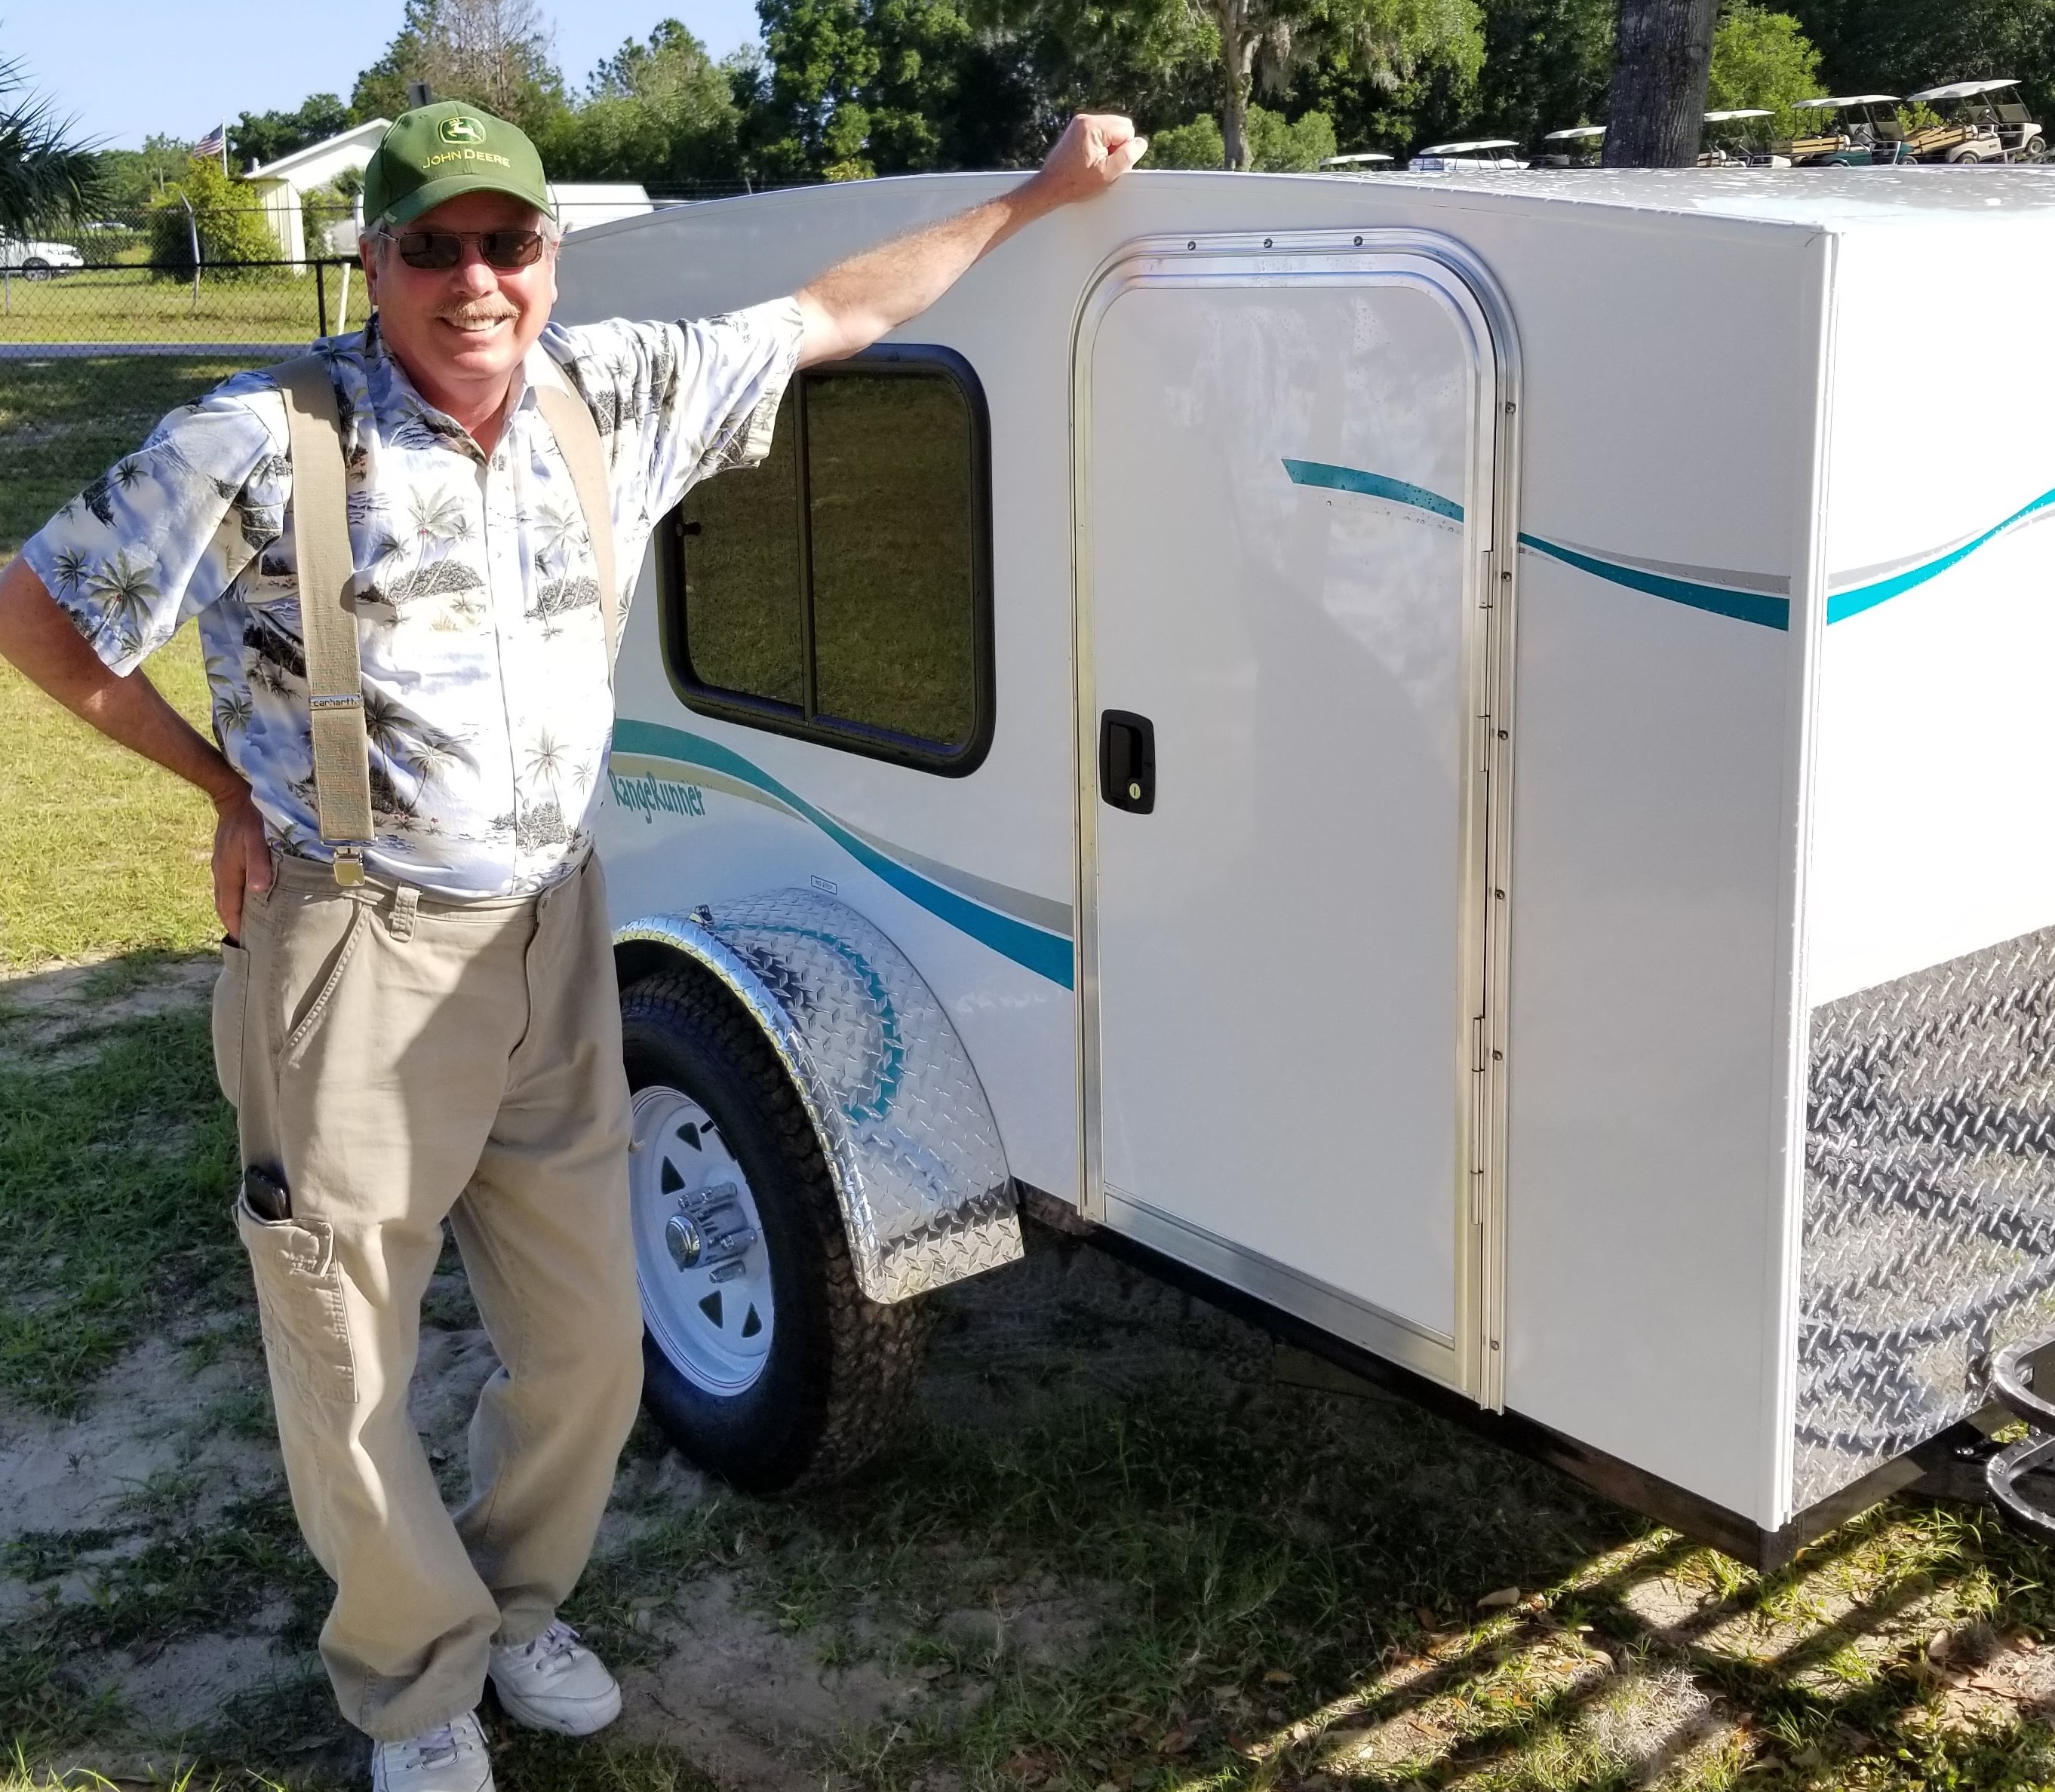 2018 Range Runner Mini Camper for Sale - $5000 - SASS Wire Classifieds ...